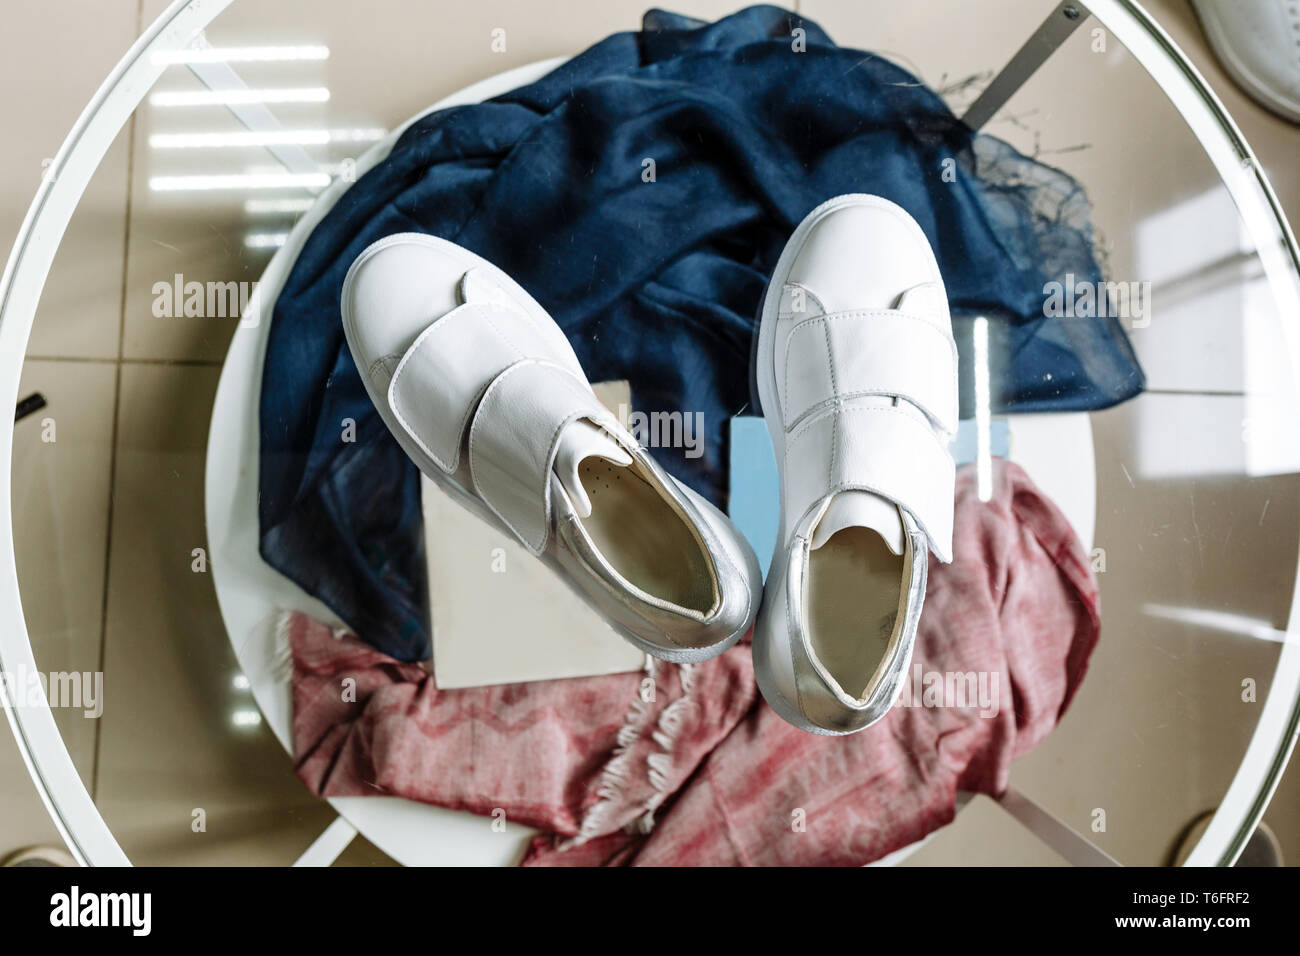 fashionable white sneakers with a star made of rhinestones on the heel on a glass table Stock Photo